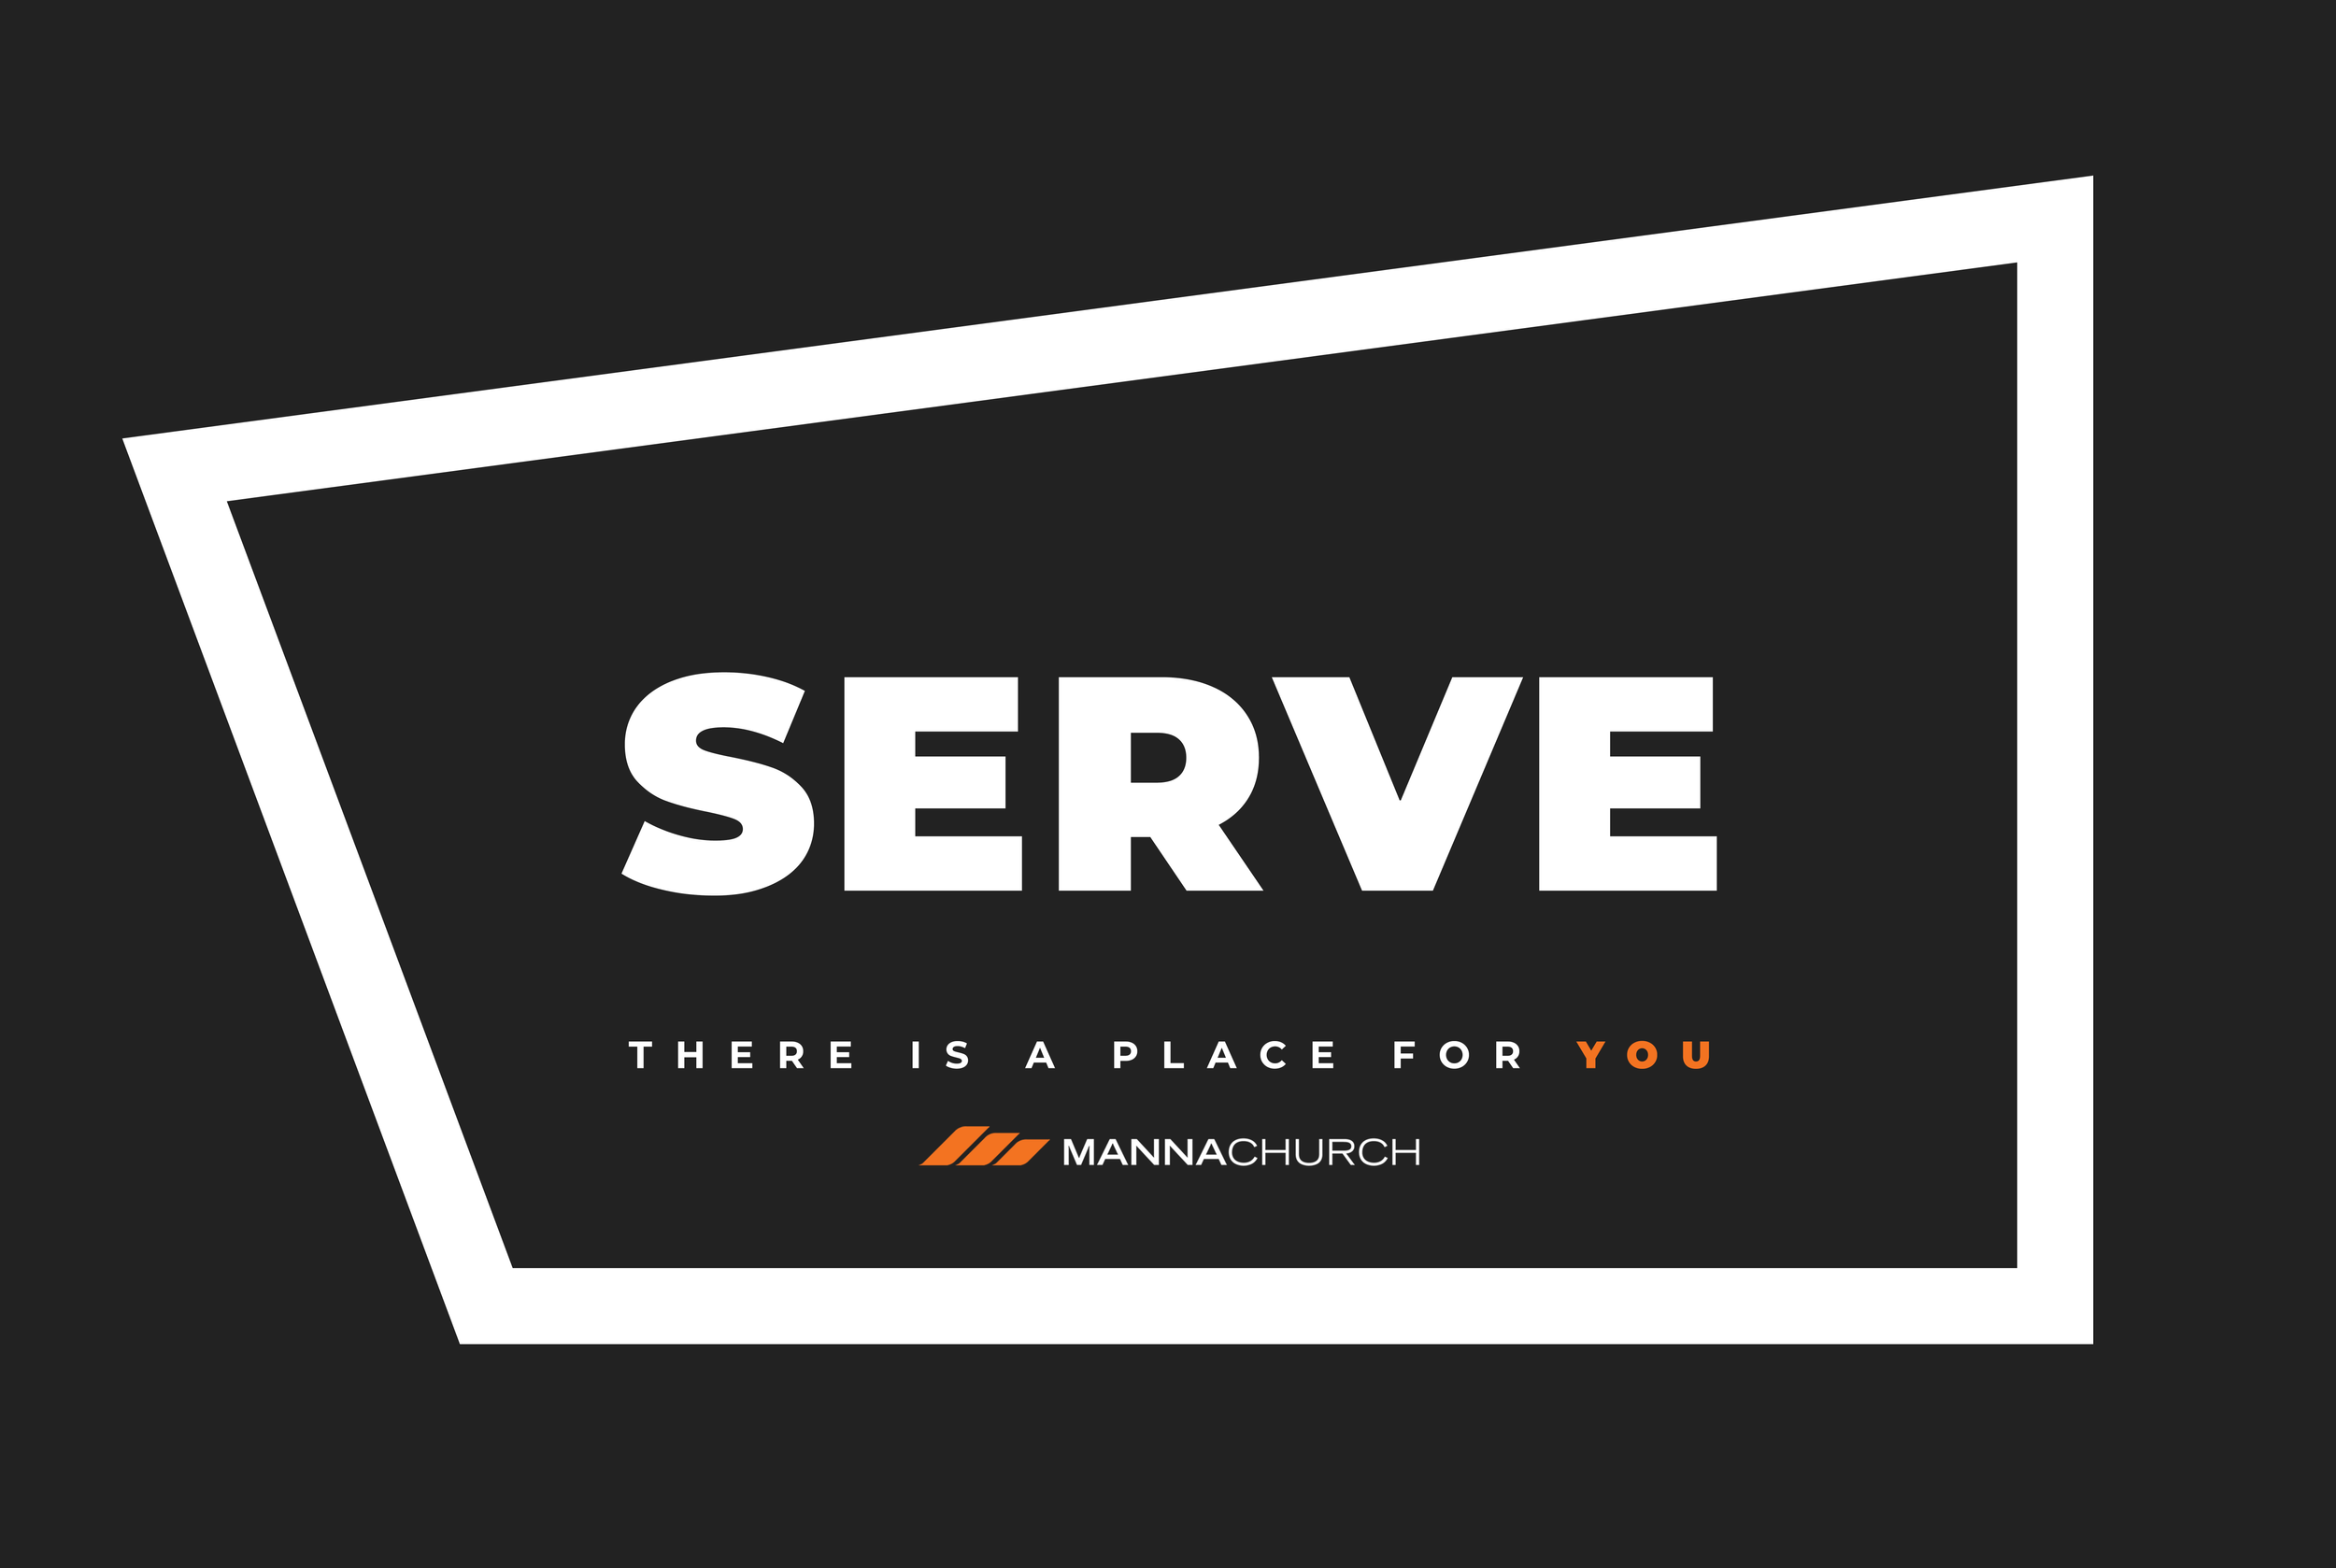 Connect Sunday 2021 Signs_SERVE.png